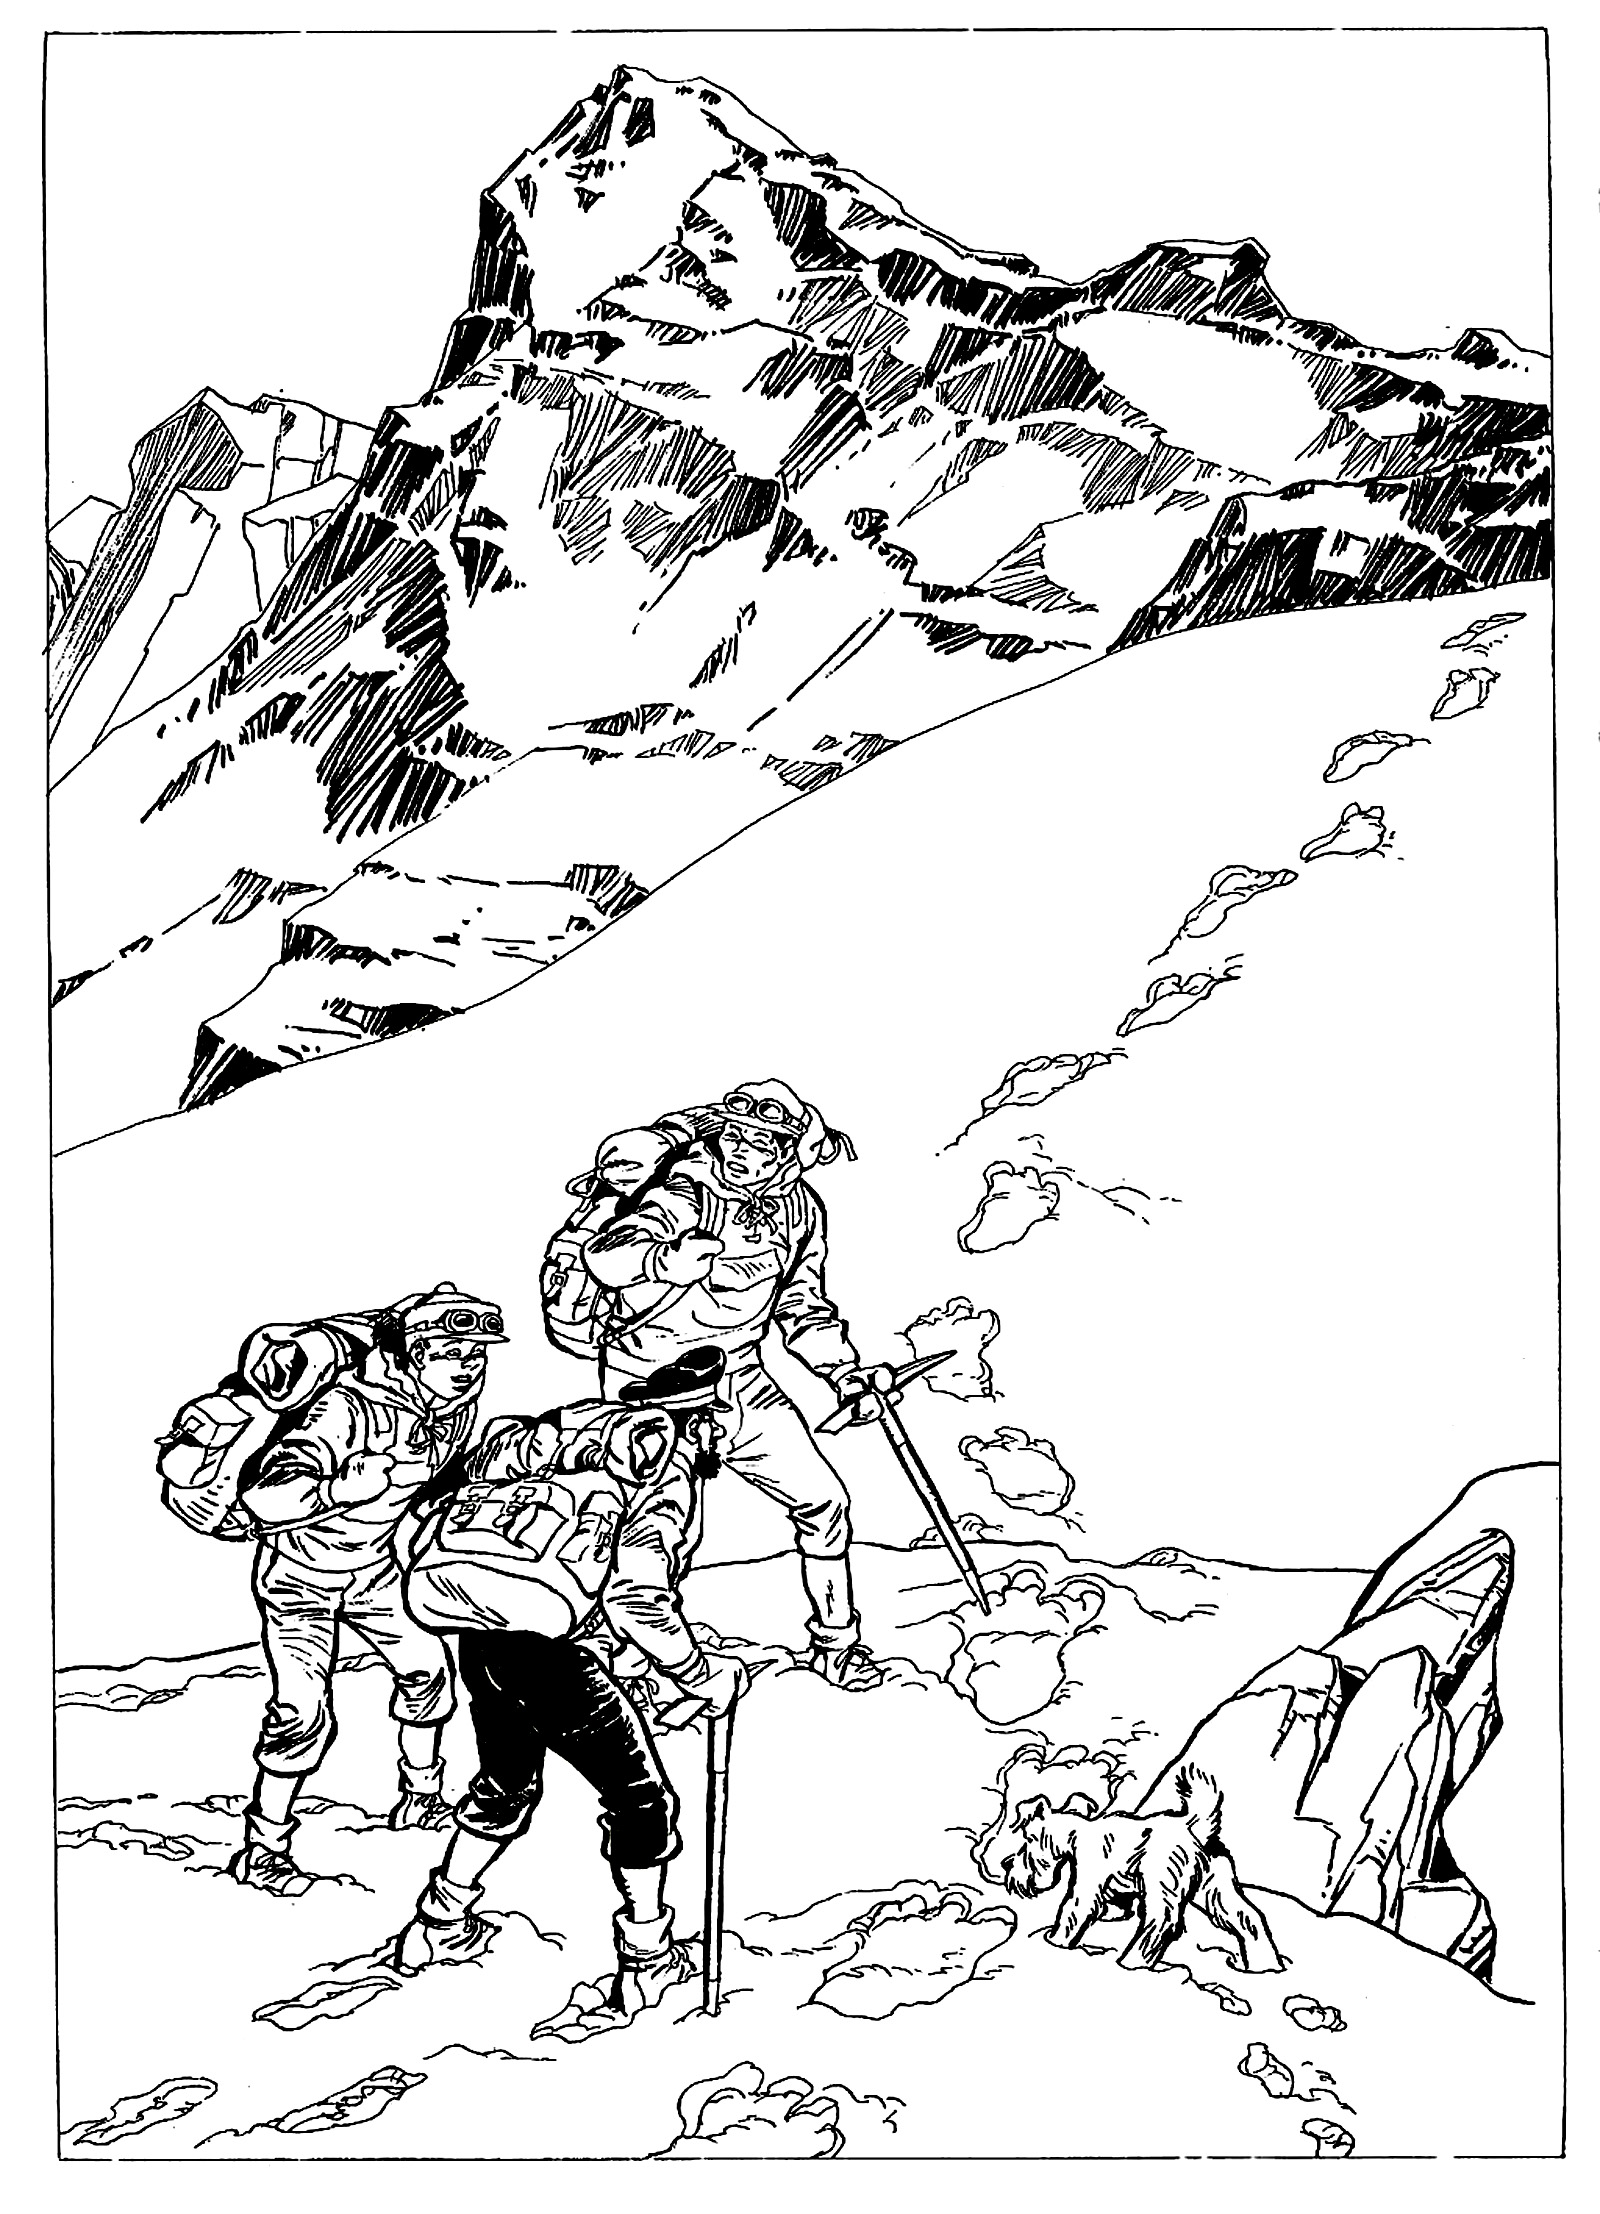 Drawing inspired by de tintin in tibet by derib - Image with : Tintin